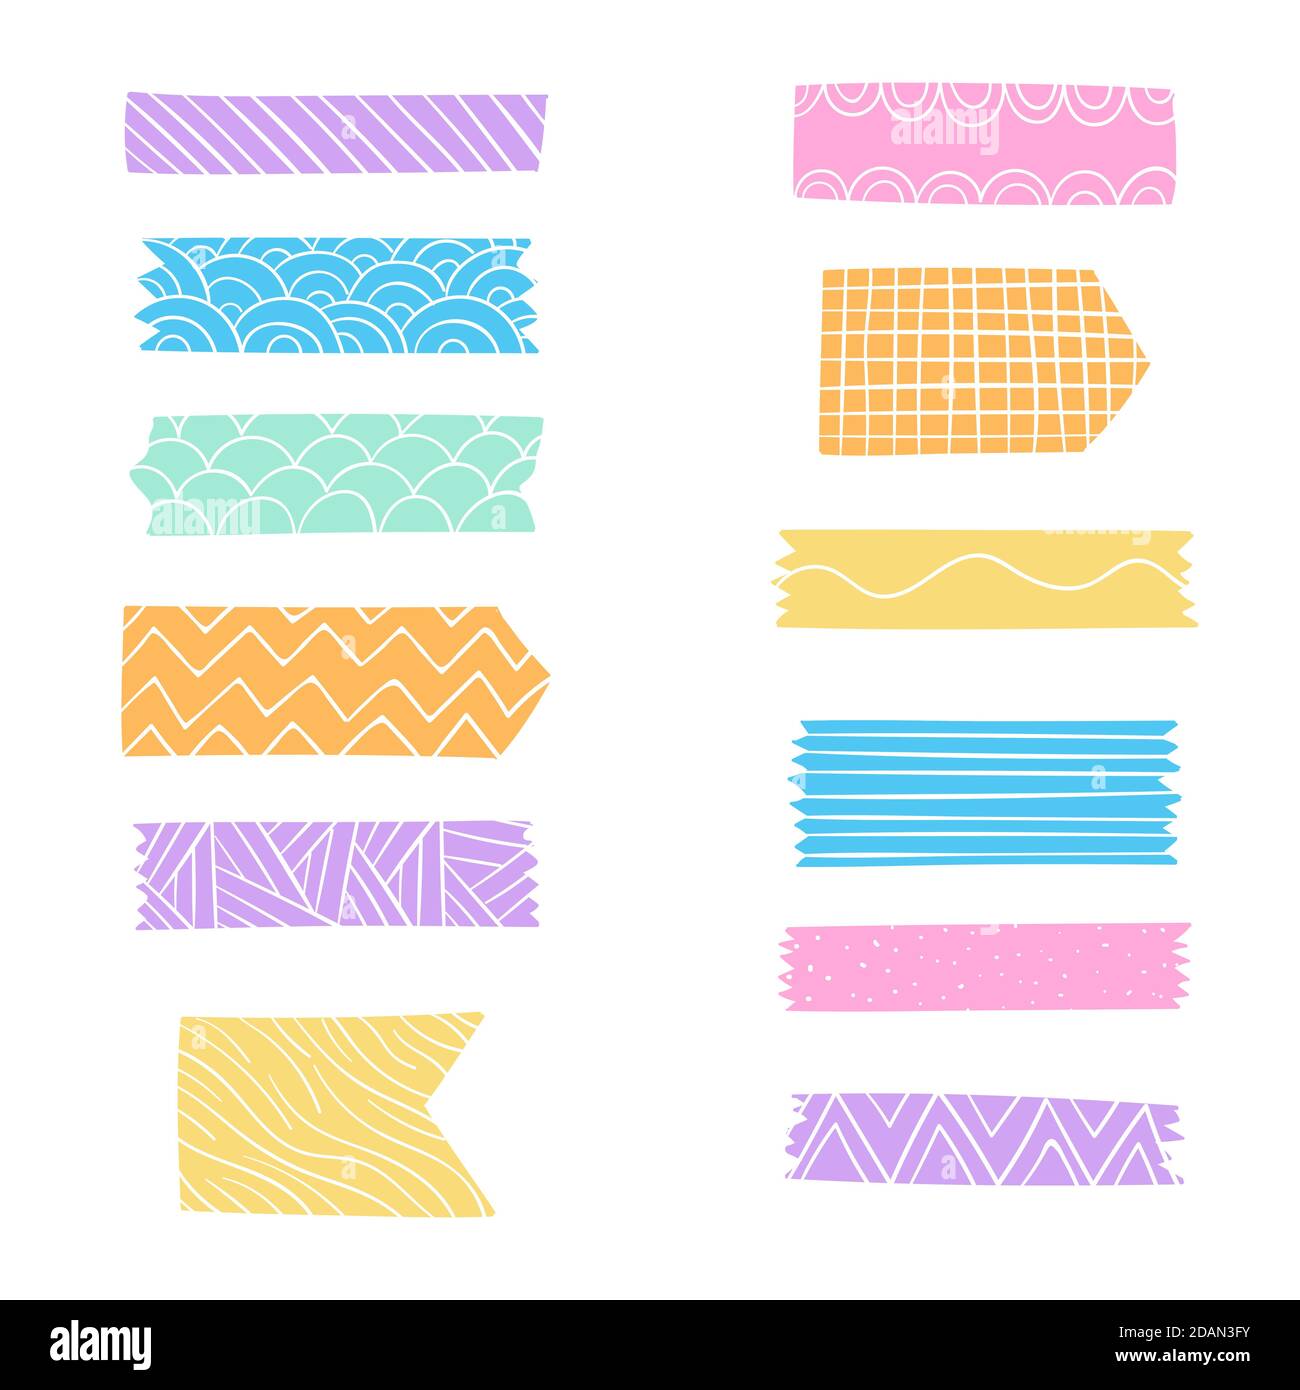 Cute Day Washi Tape Strips Stickers Stock Vector (Royalty Free